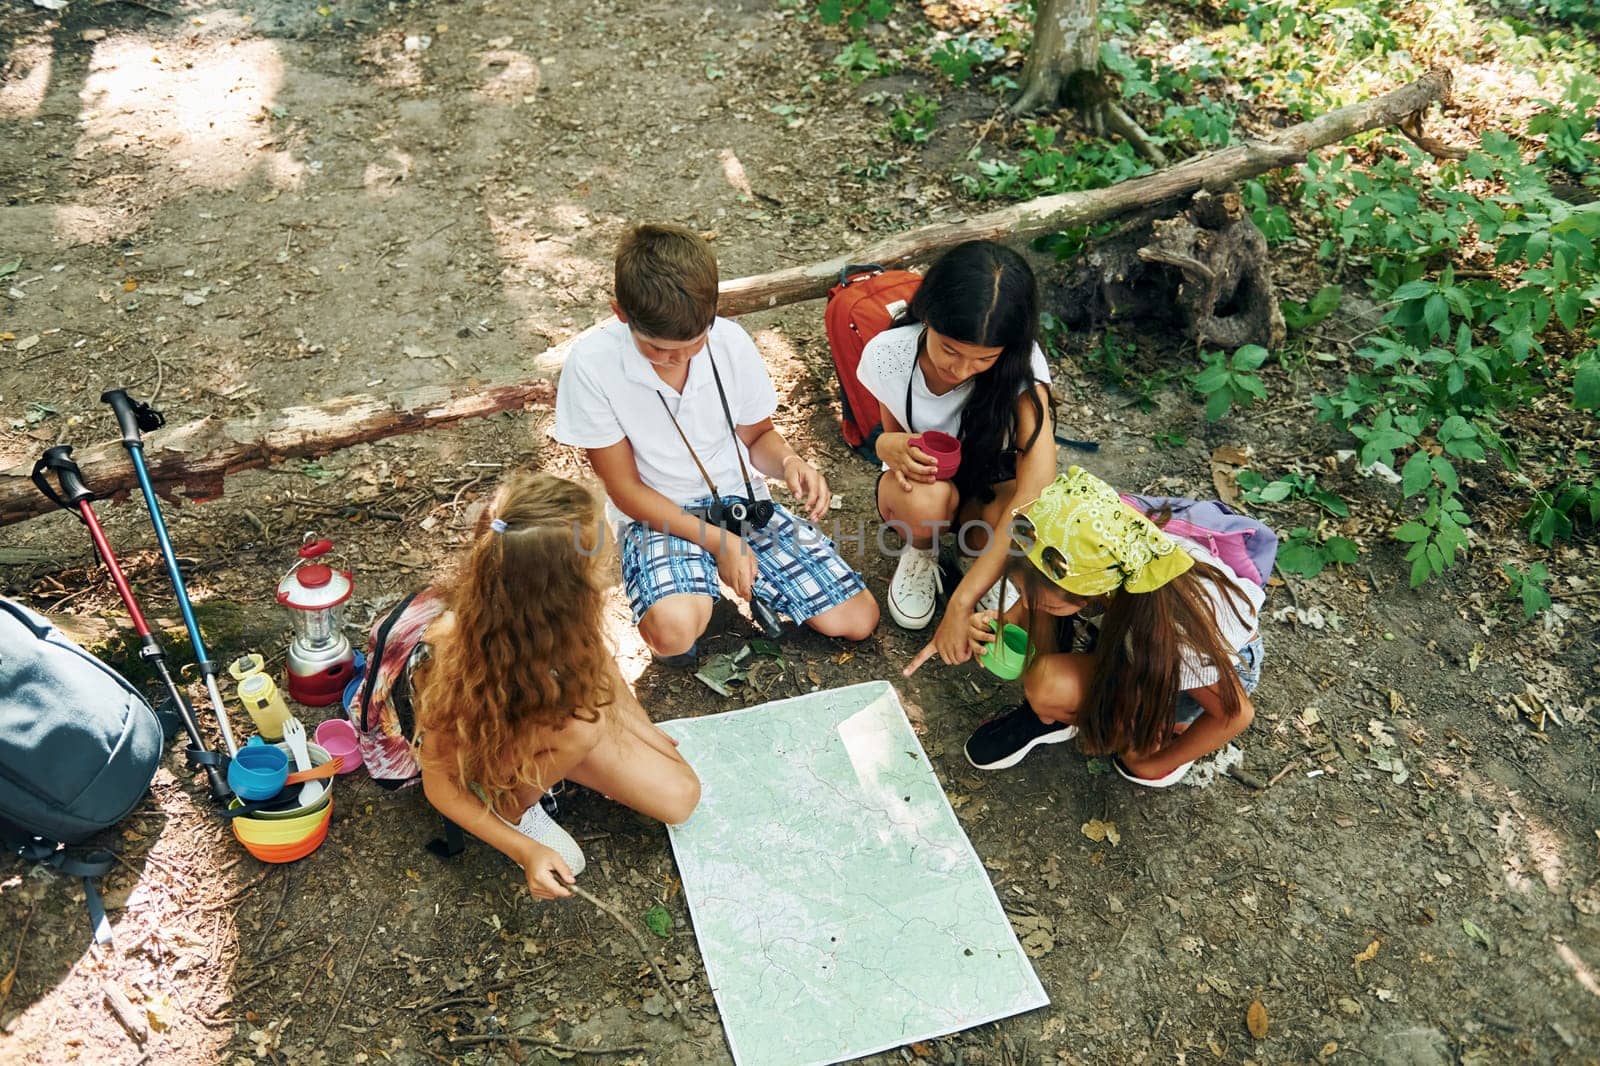 Sitting on the ground. Kids strolling in the forest with travel equipment by Standret